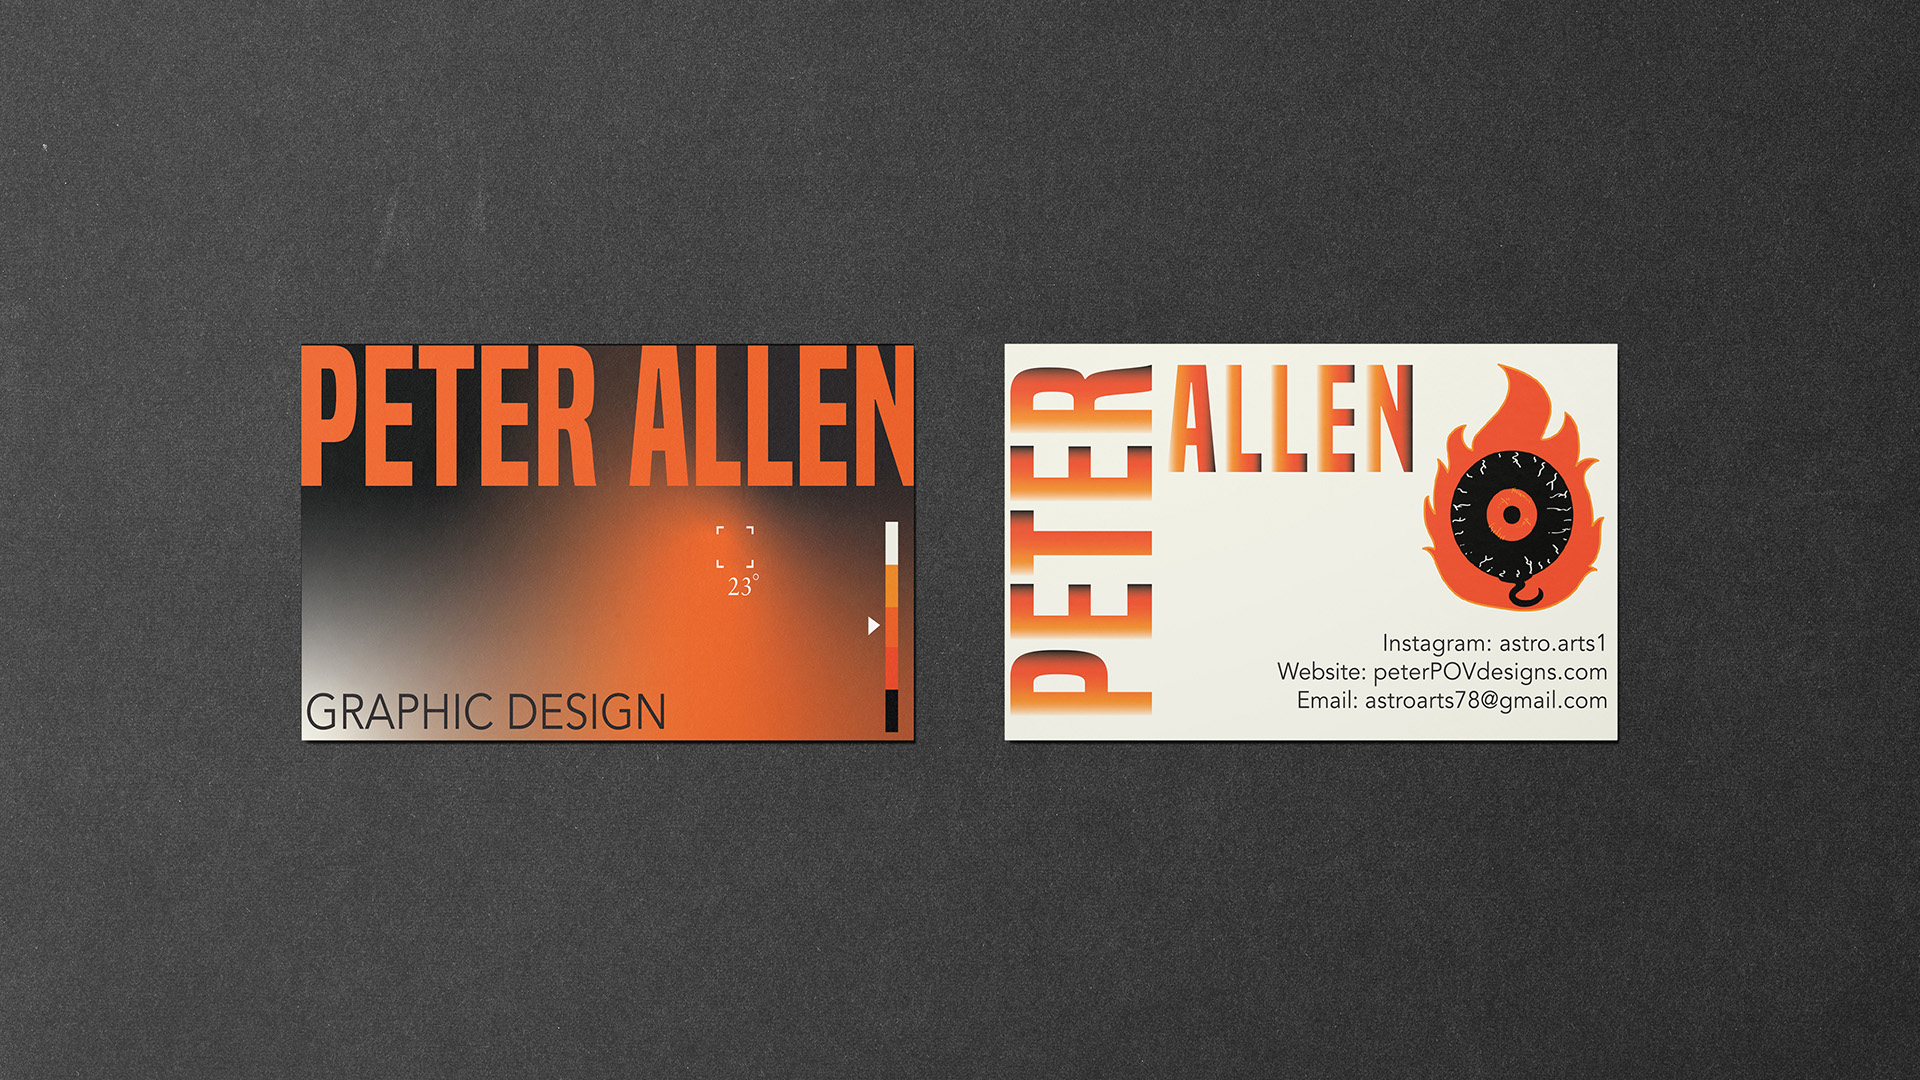 Business Card / Business Card, business card design, 2 x 3.5 inches print, 2023. This business card design was created for my own personal brand. Overall, I wanted it to reflect my brand personality while promoting my business.